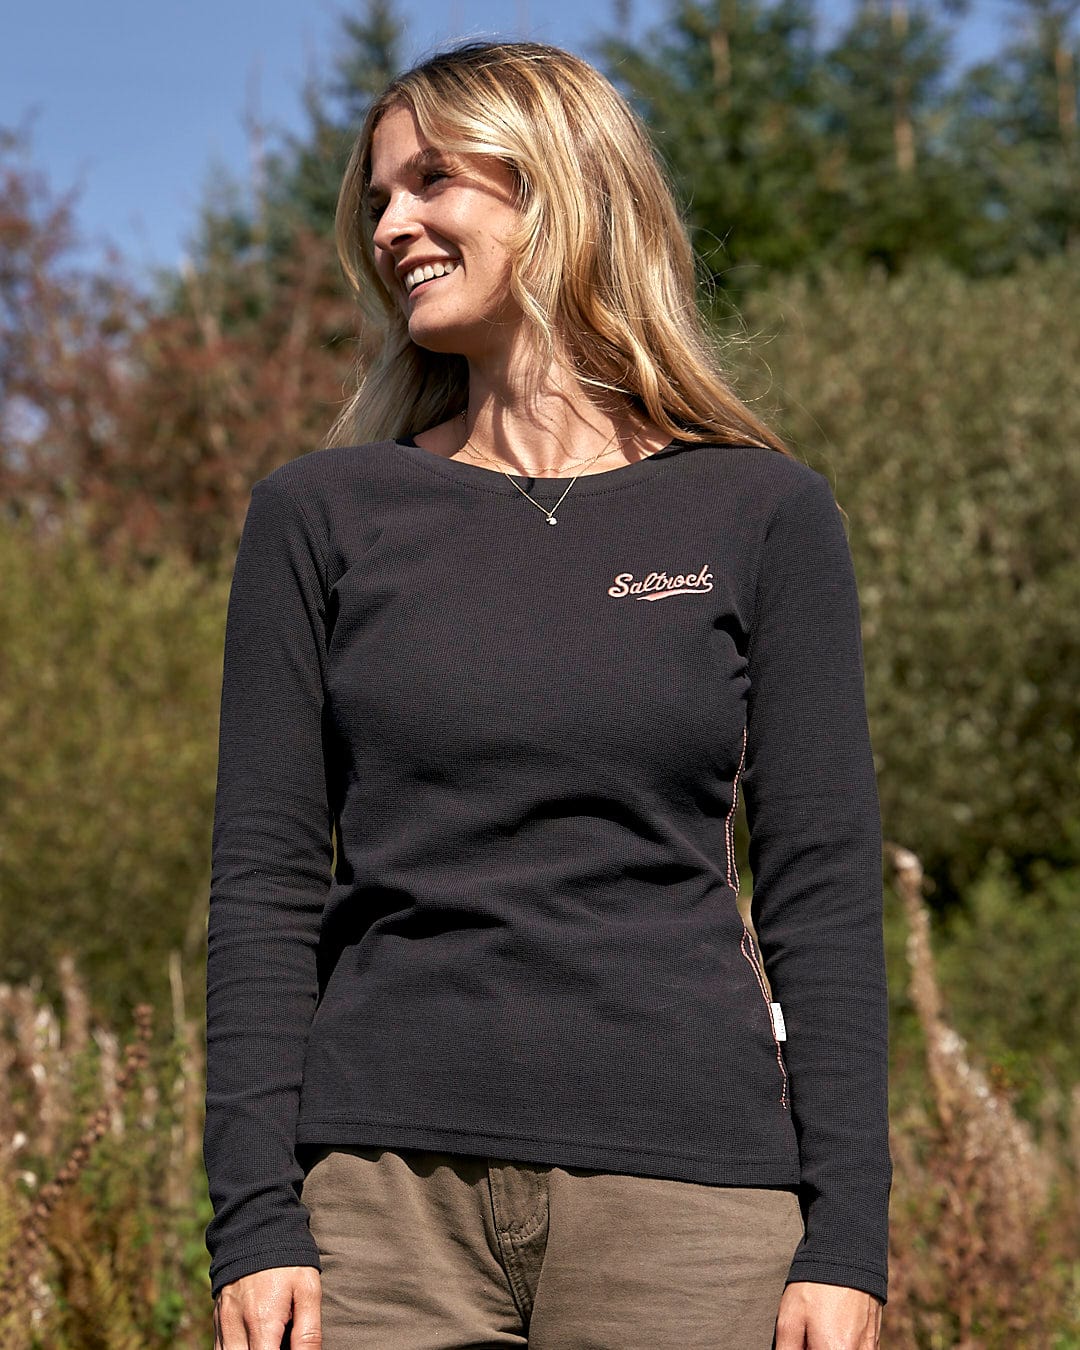 A woman wearing the Saltrock Rory - Womens Long Sleeve Waffle T-Shirt in Black standing in a field.